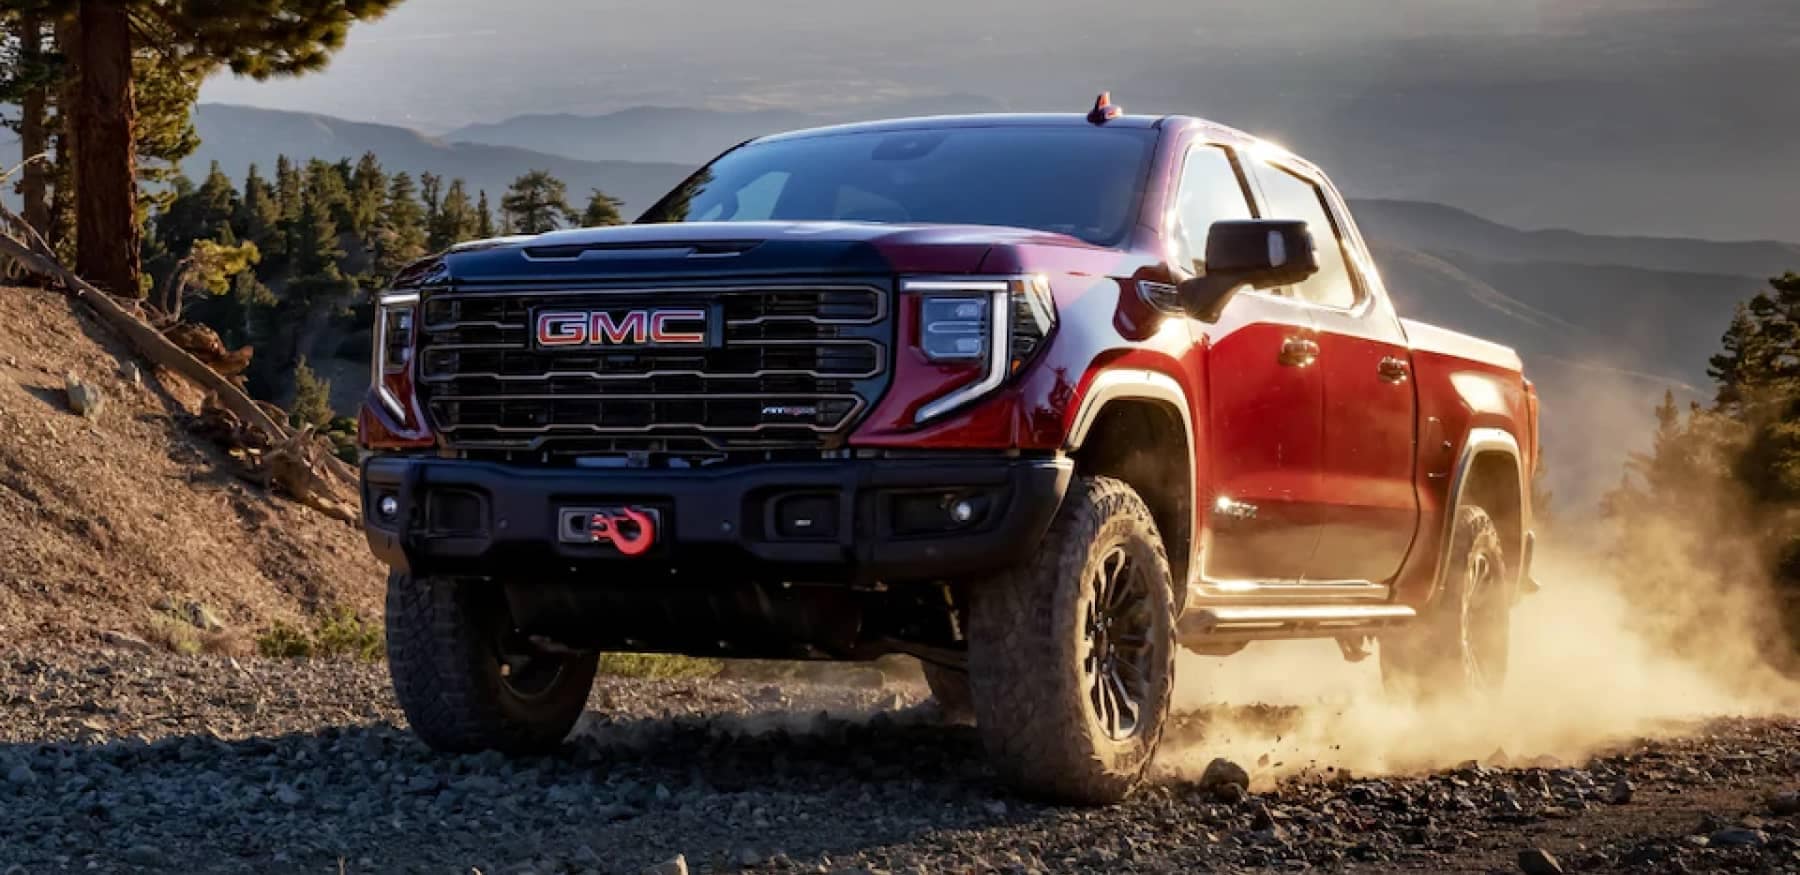 An exterior shot of a red GMC truck driving on a dirt road